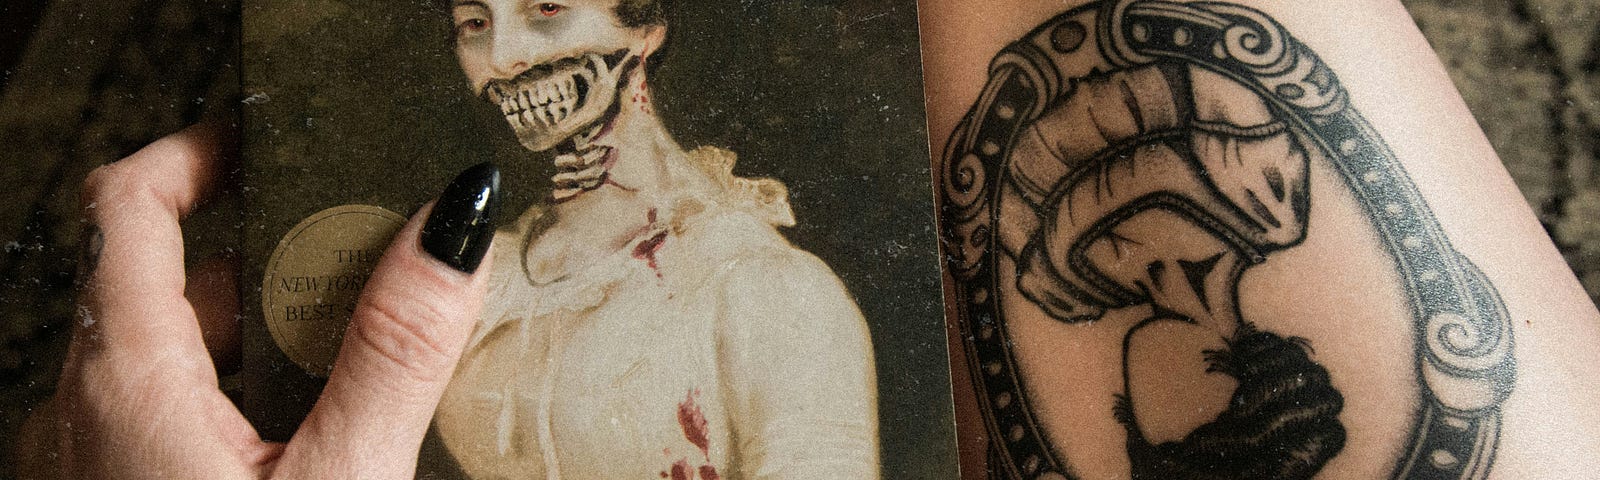 The gruesome cover of the novel Pride and Prejudice and Zombies with the bones beneath a woman’s face showing. All clues to the story.